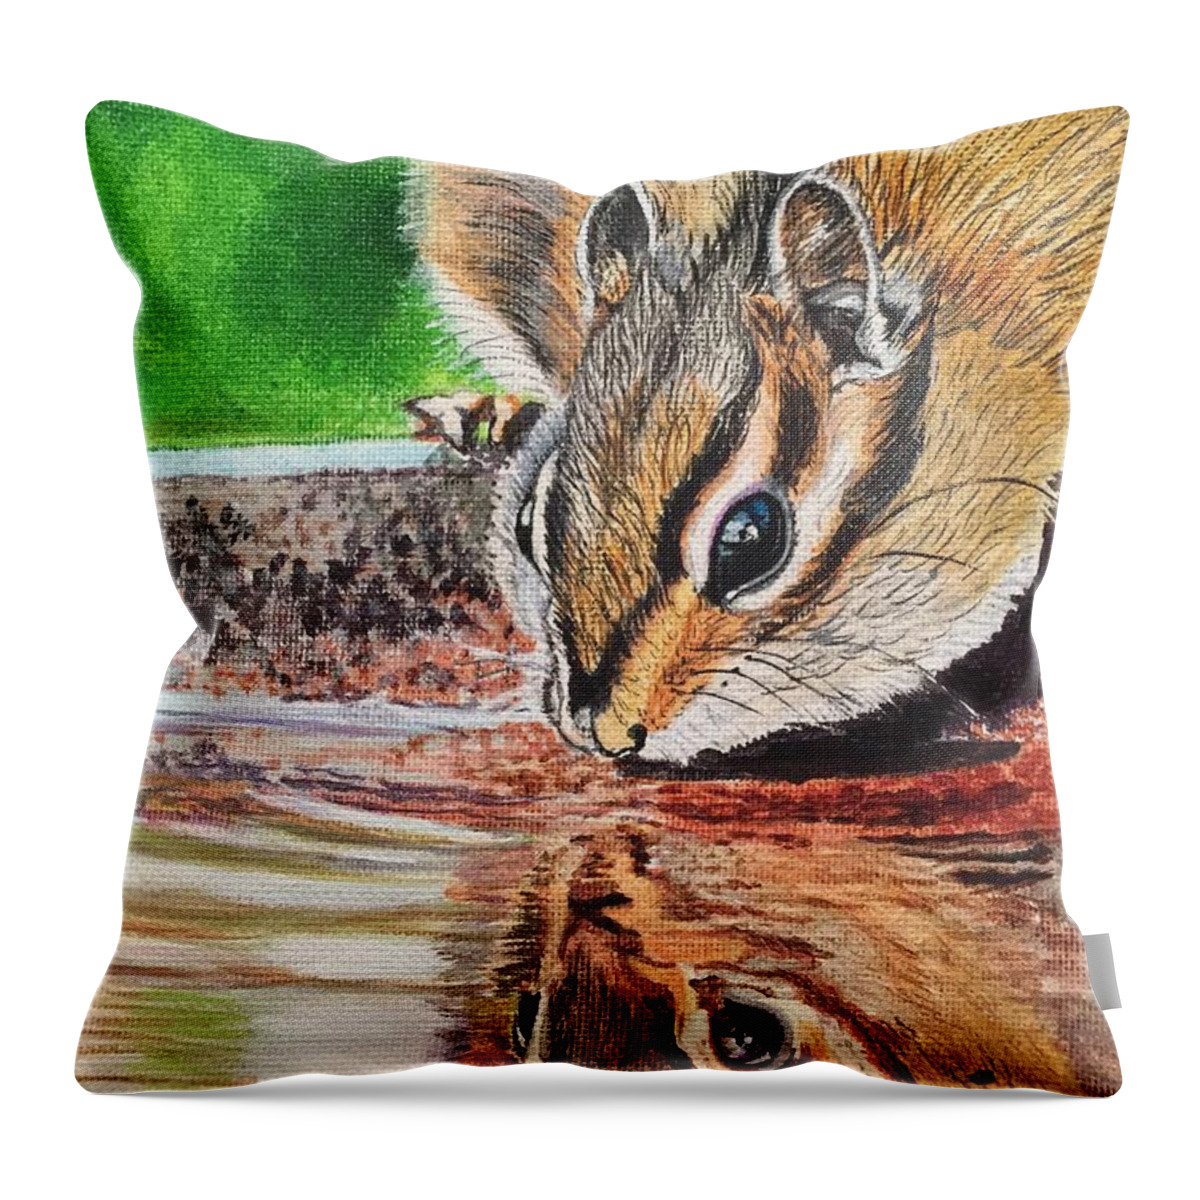 Chipmunk Throw Pillow featuring the painting Reflecting on the Day by Sonja Jones